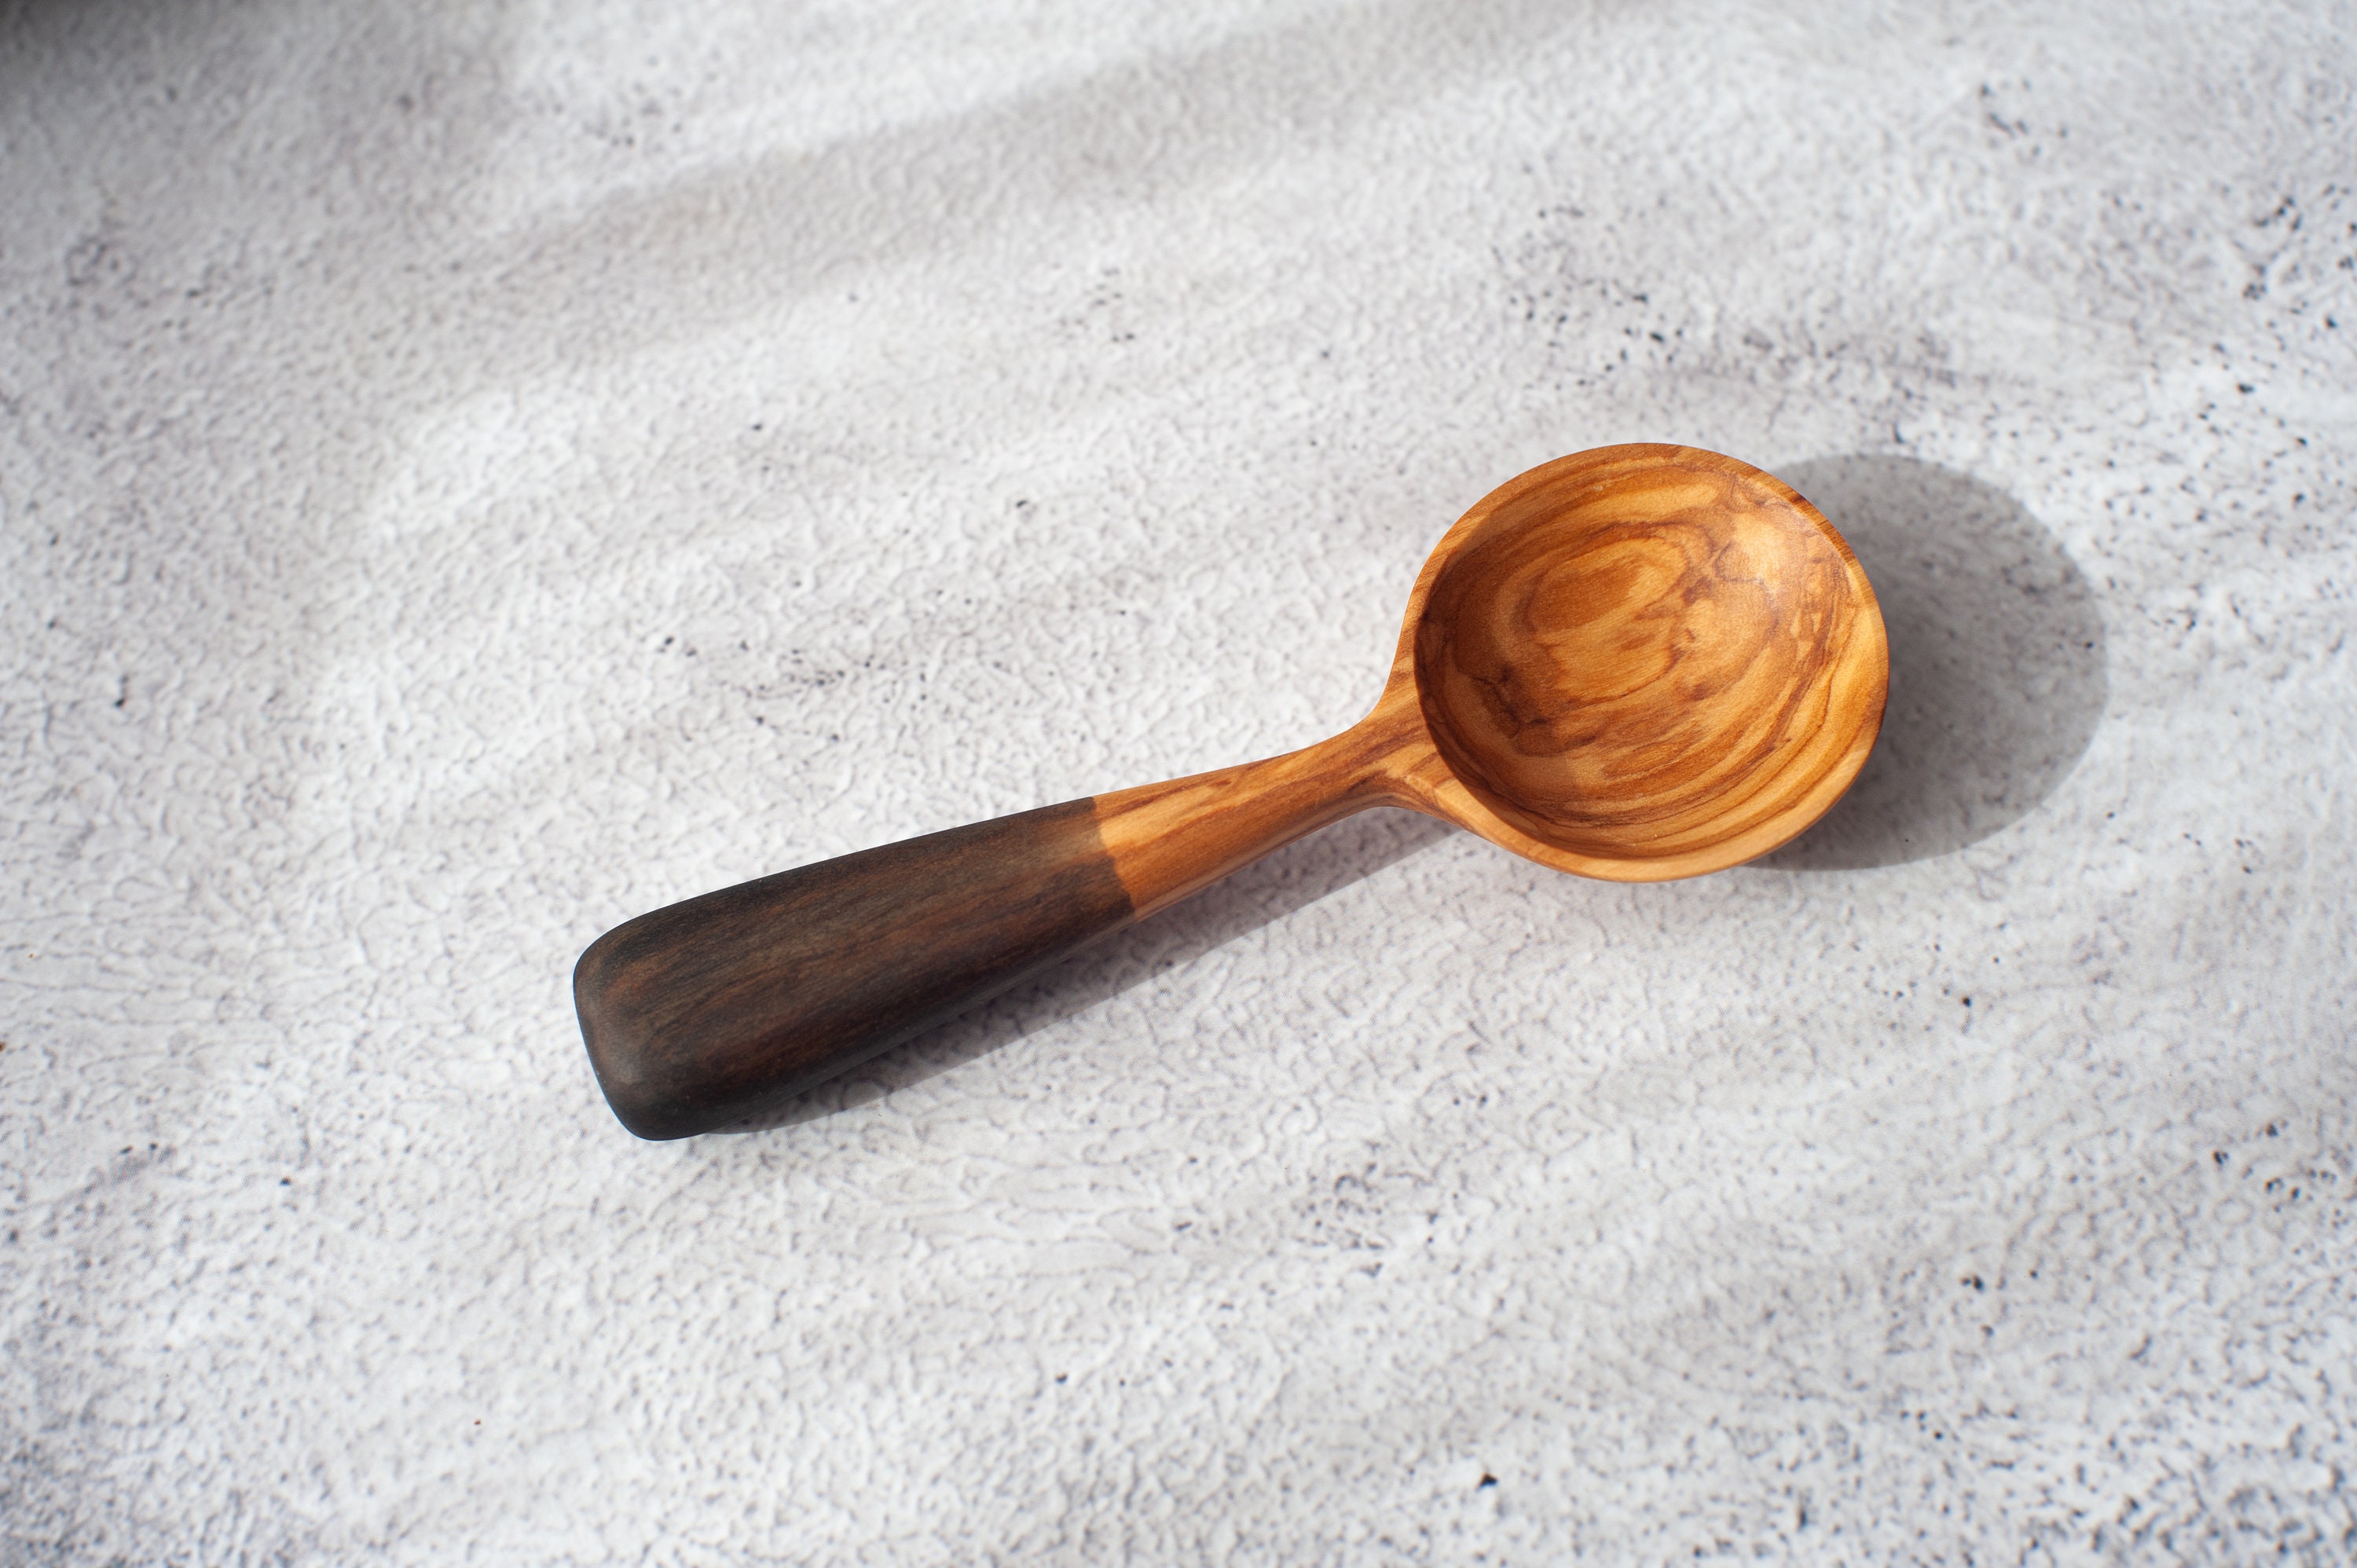 Handcrafted Olive Wood Spoon Rest and Coffee Scoop